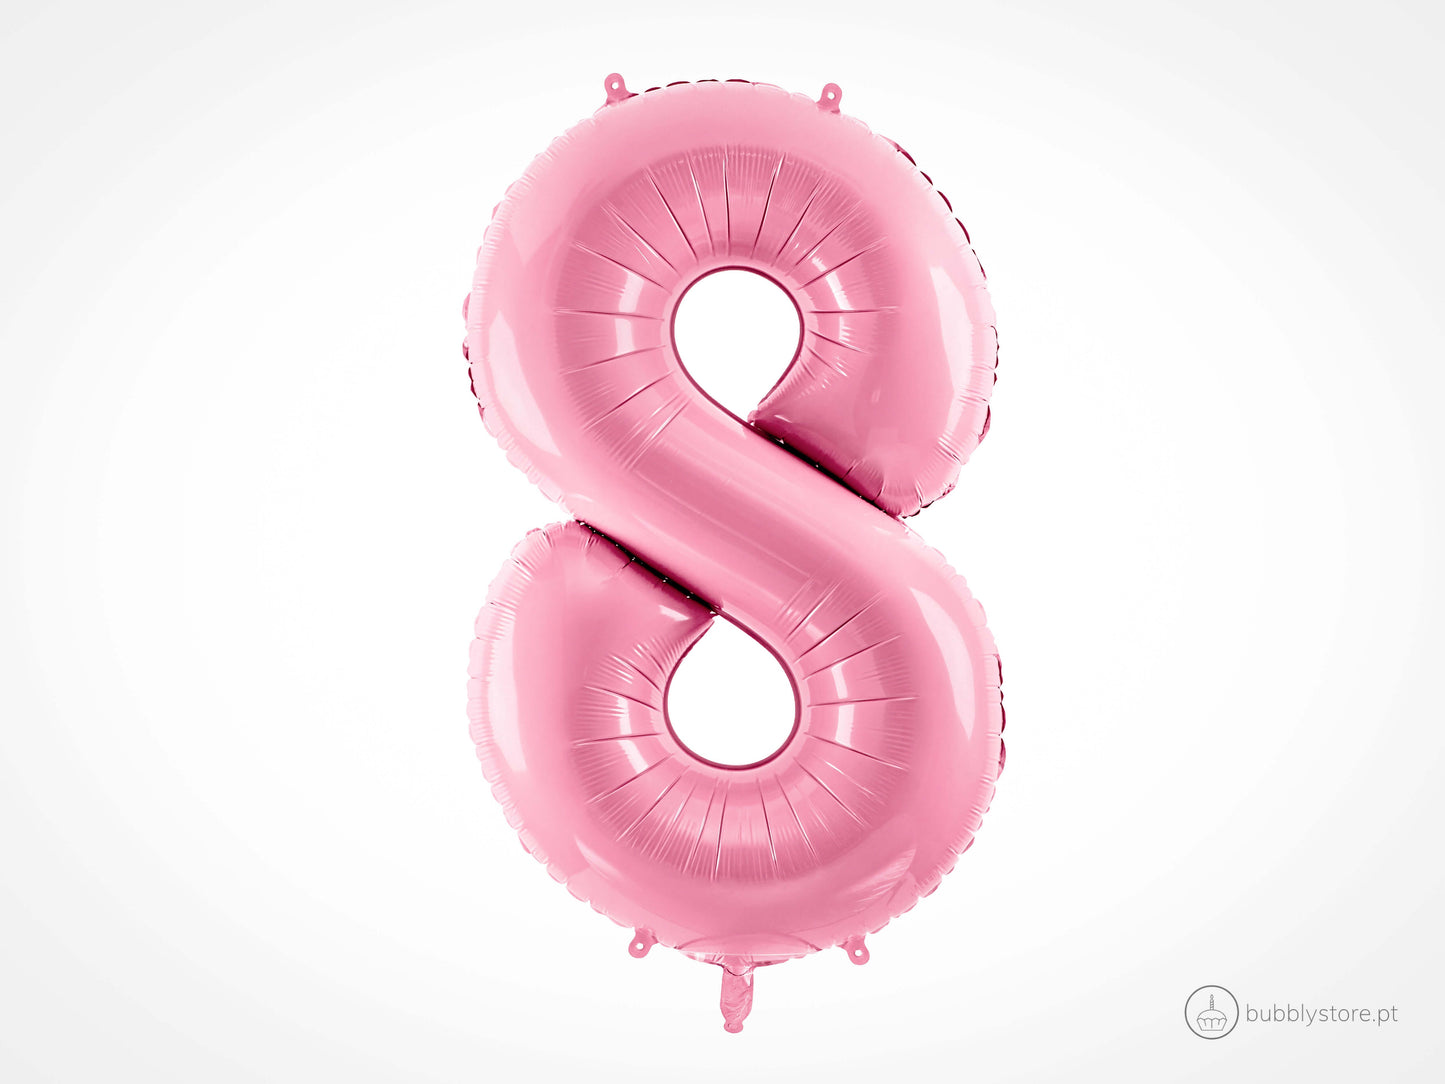 Pink Number Balloons